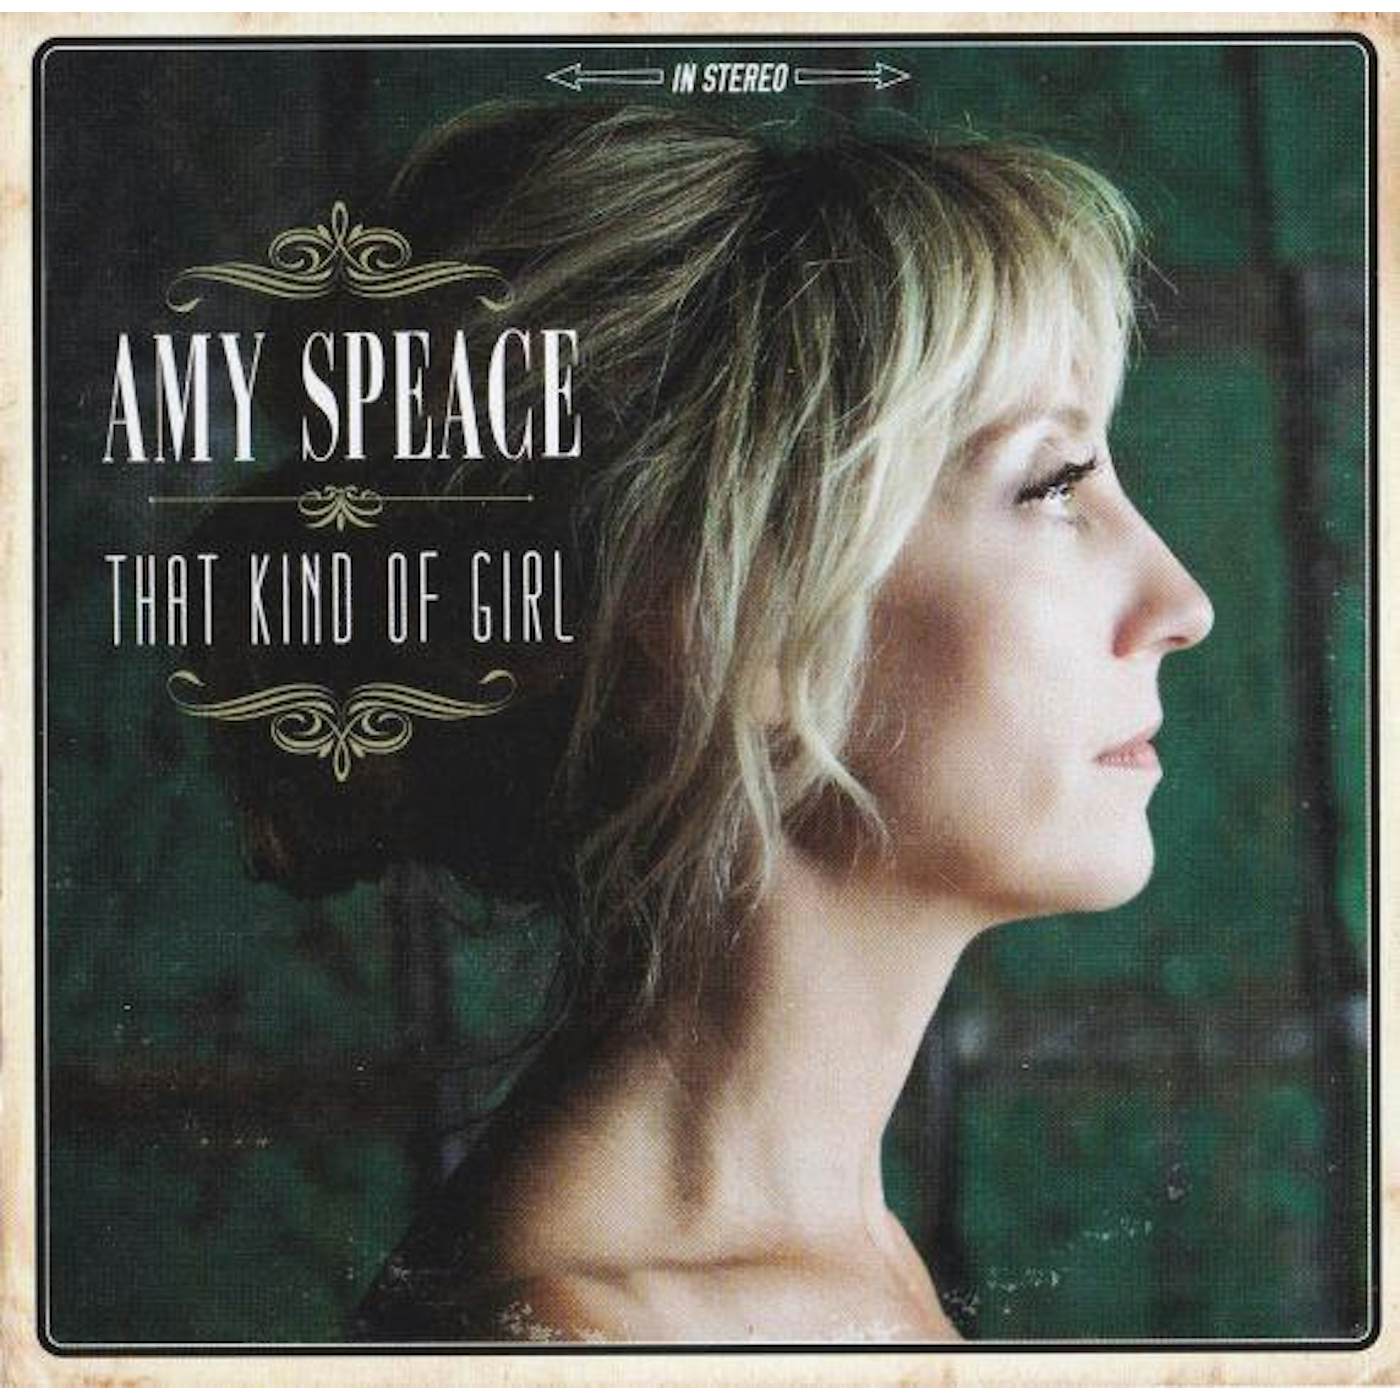 Amy Speace THAT KIND OF GIRL CD